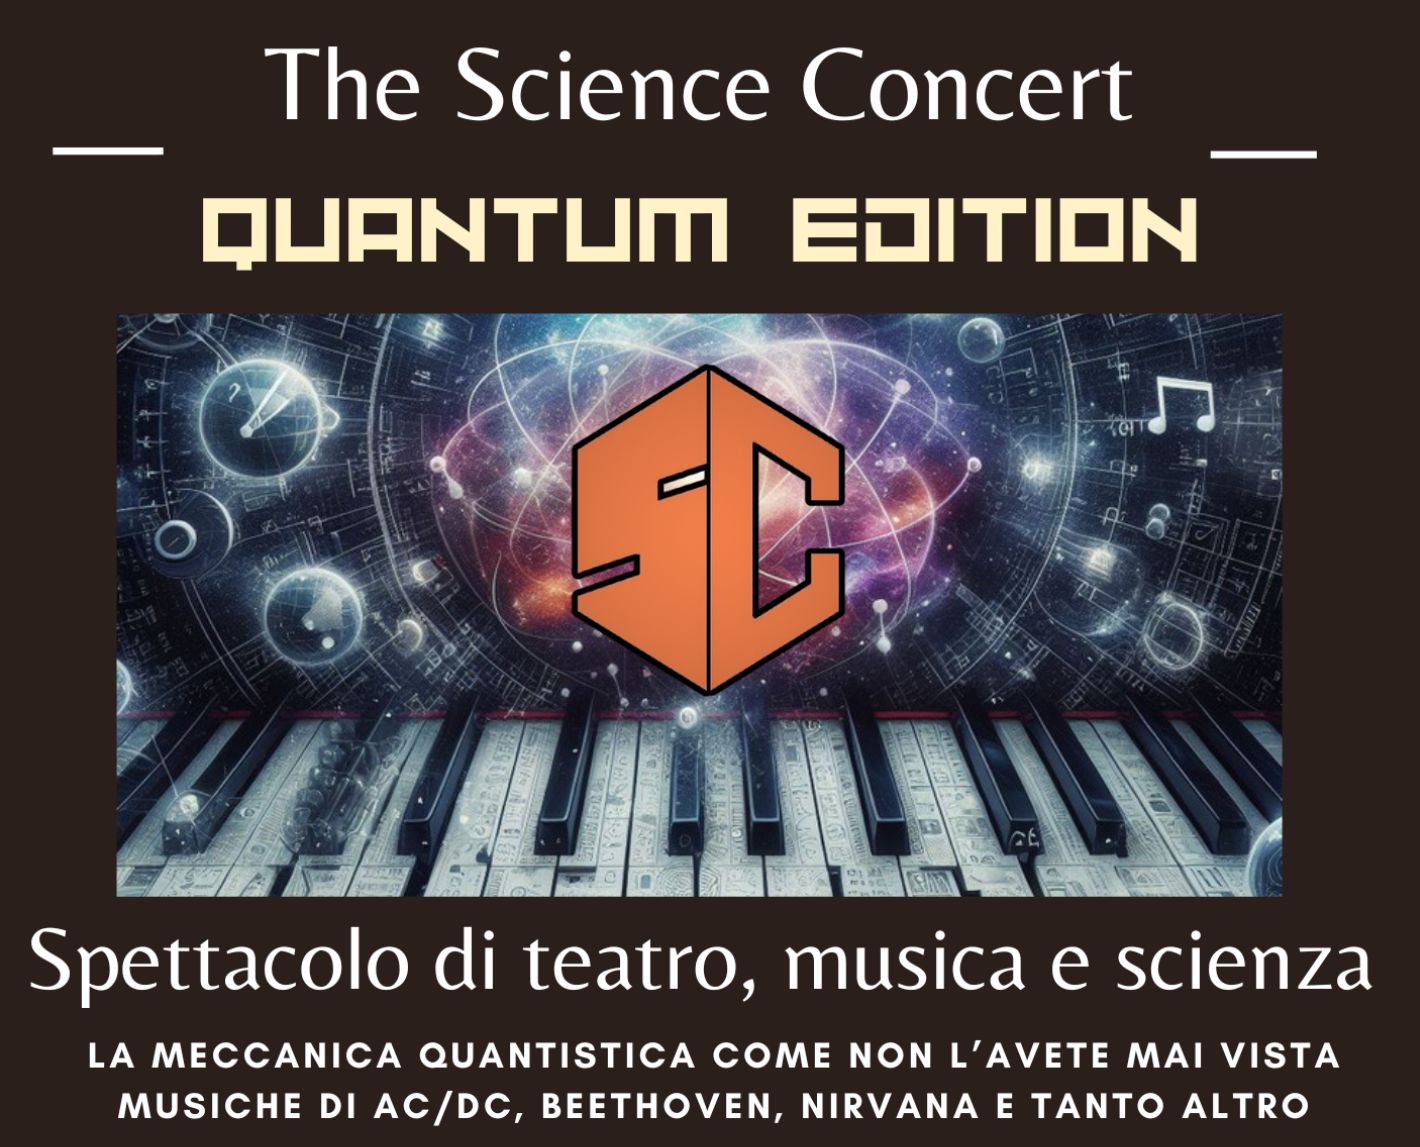 The Science Concert - Quantum Edition: an interdisciplinary journey through music and science